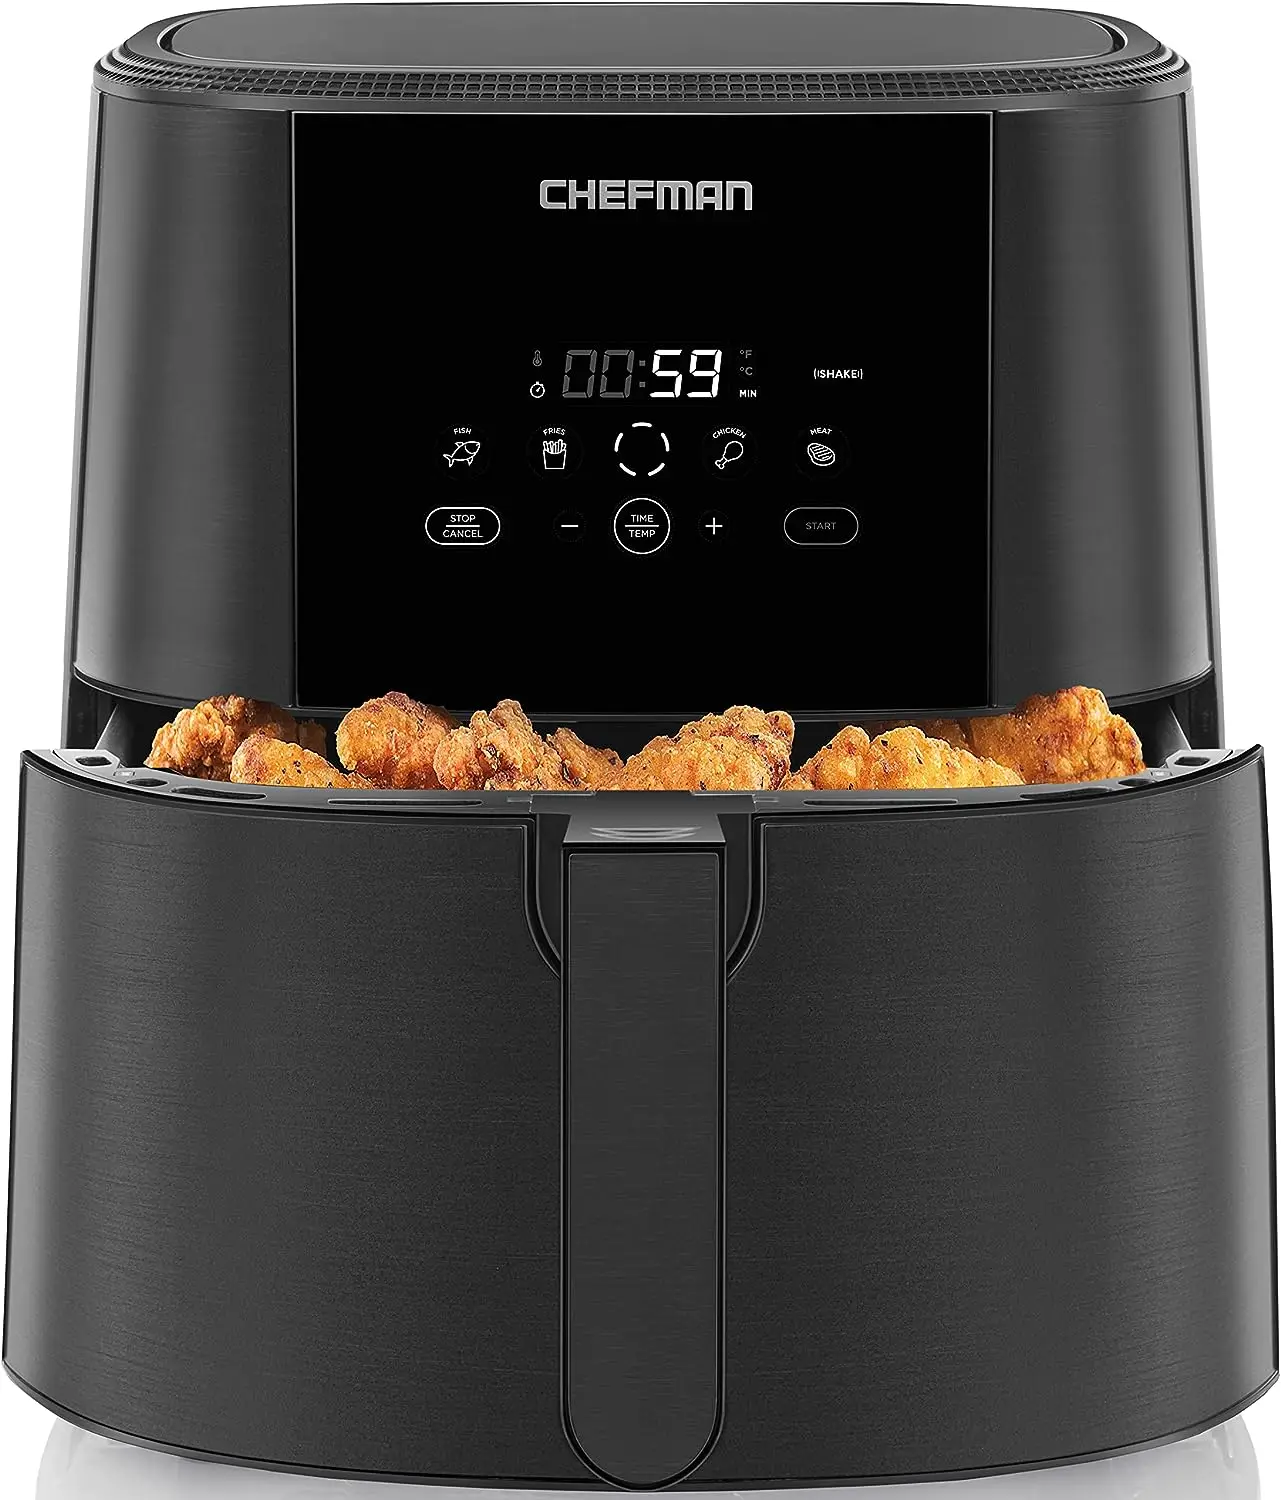 

TurboFry Touch Air Fryer, 8-Quart Family Size, One-Touch Digital Controls for Healthy Cooking, Presets for French Fries, Chicken